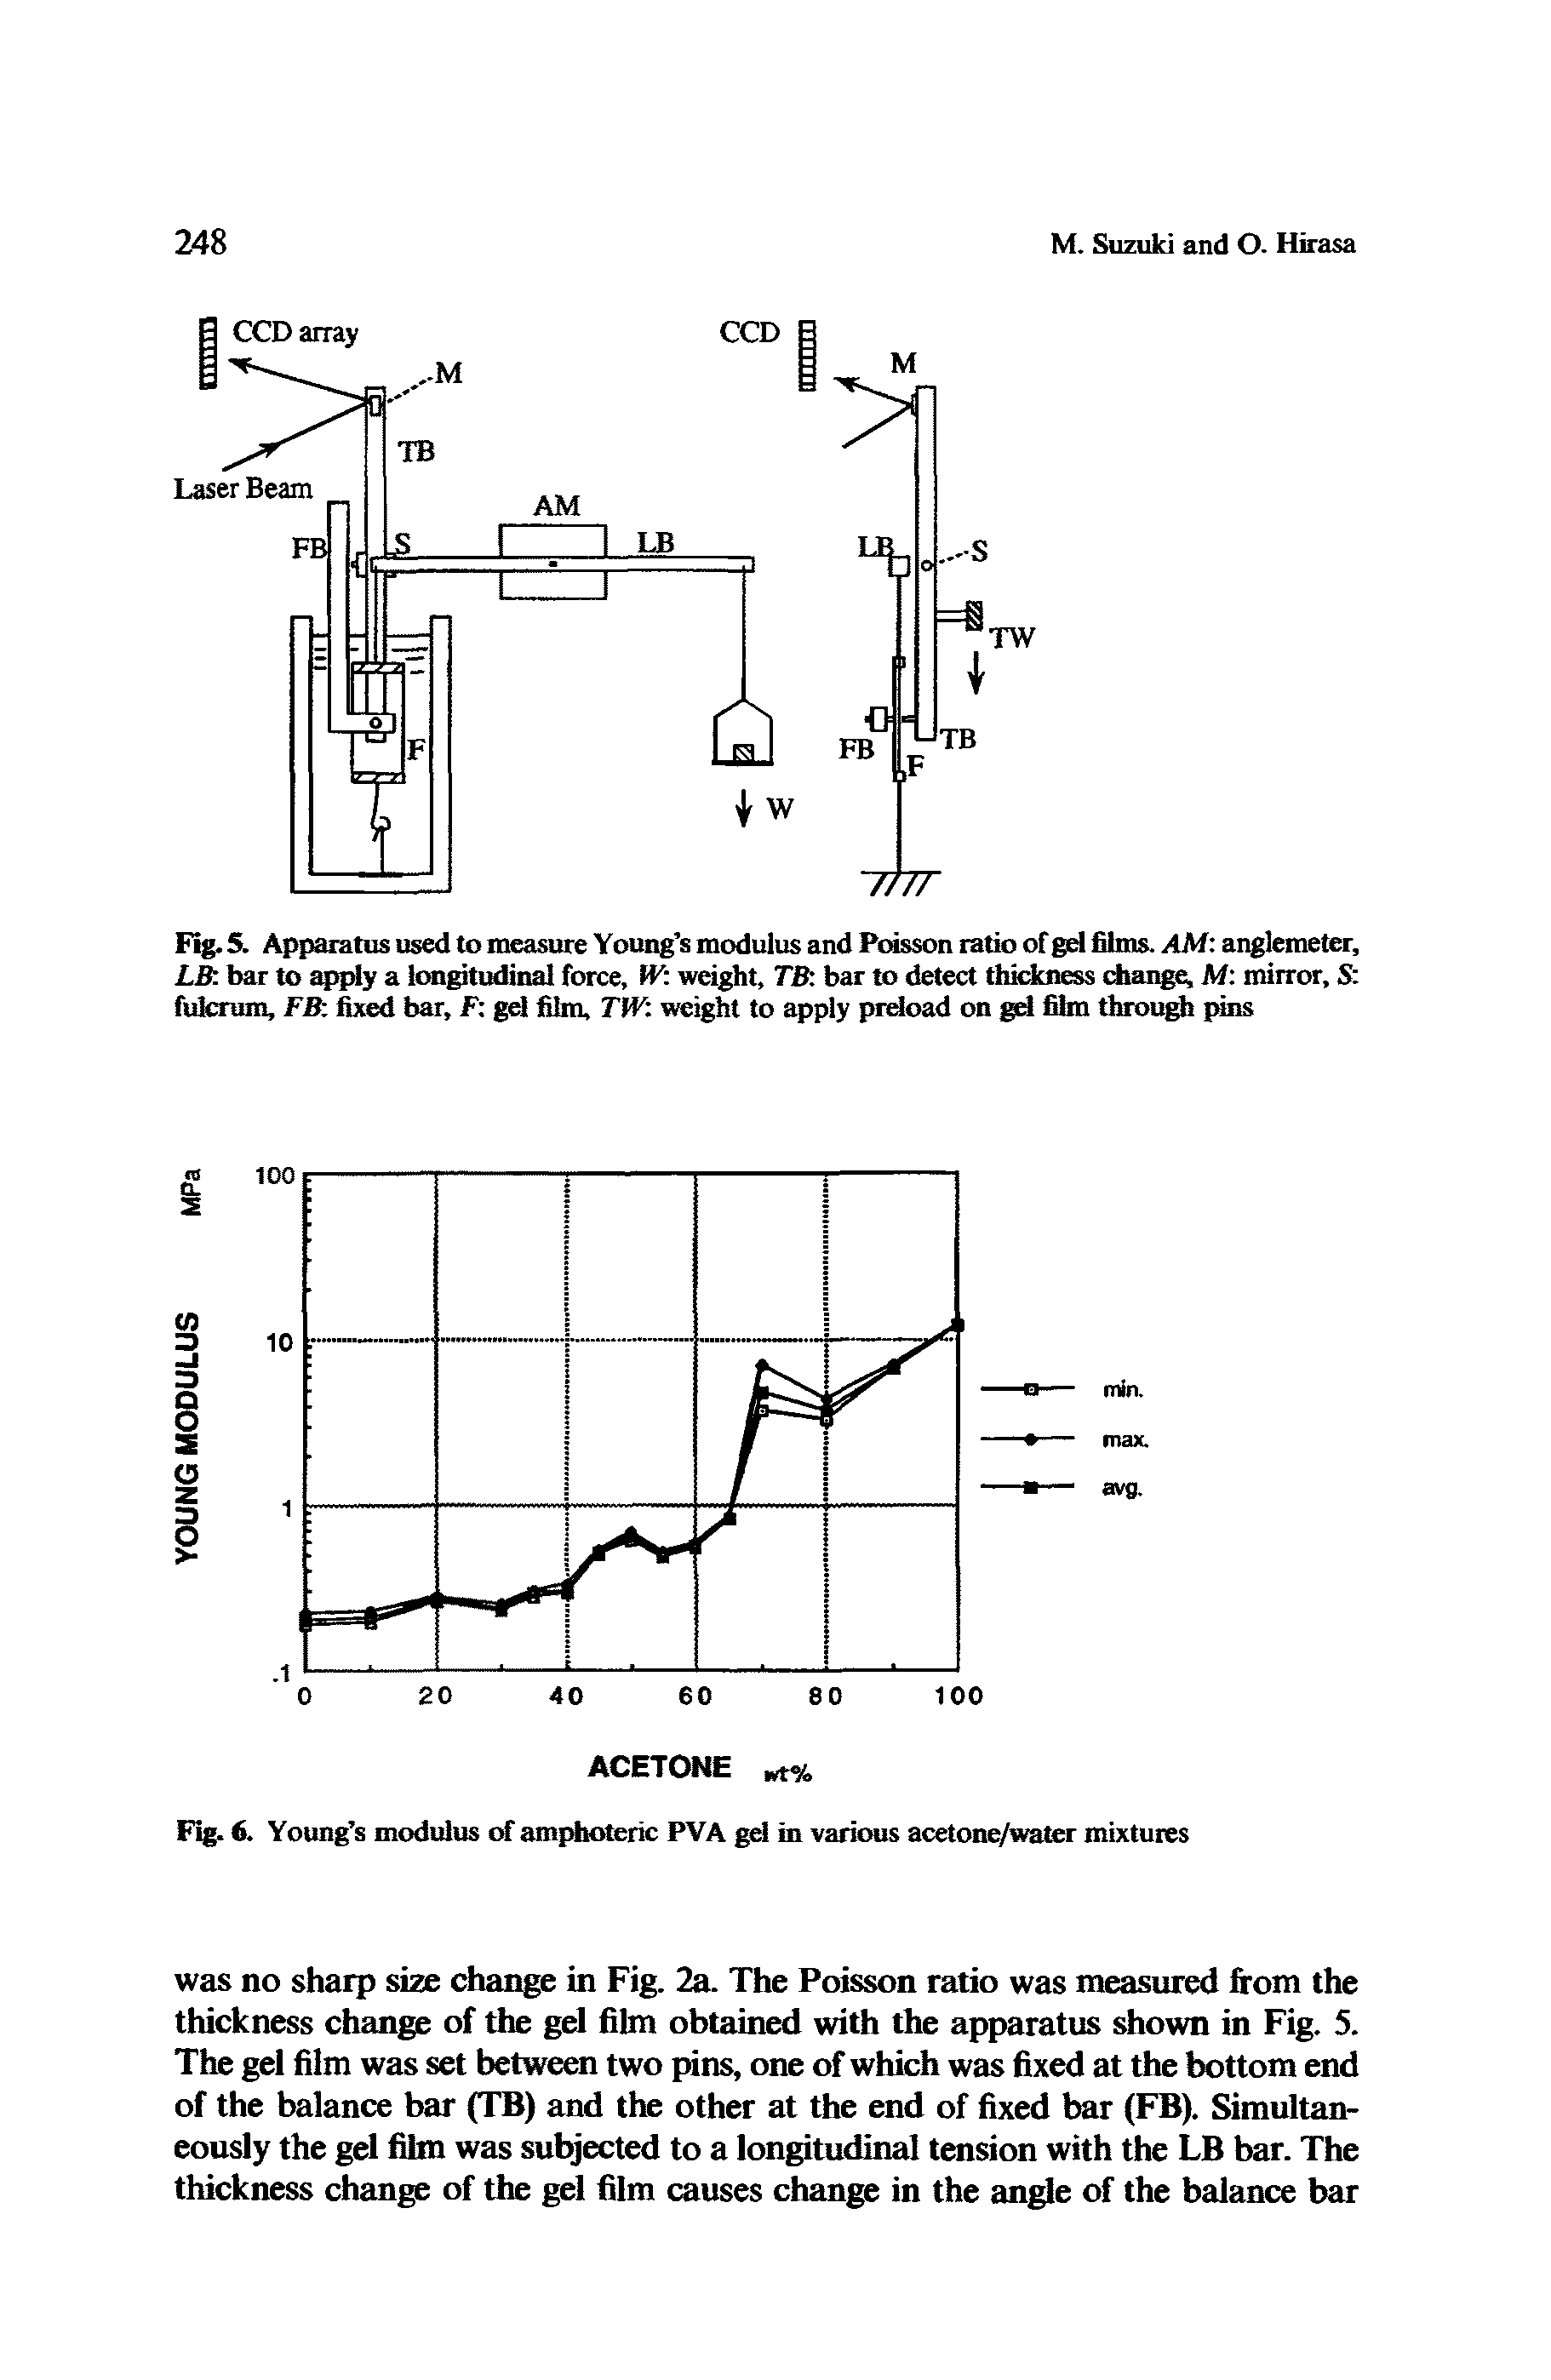 Fig. 5. Apparatus used to measure Young s modulus and Poisson ratio of gel films. AM anglemeter, LB bar to apply a longitudinal force, W weight, TB bar to detect thickness change, M mirror, S fulcrum, FB fixed bar, F gel film, TW weight to apply preload on gel film through pins...